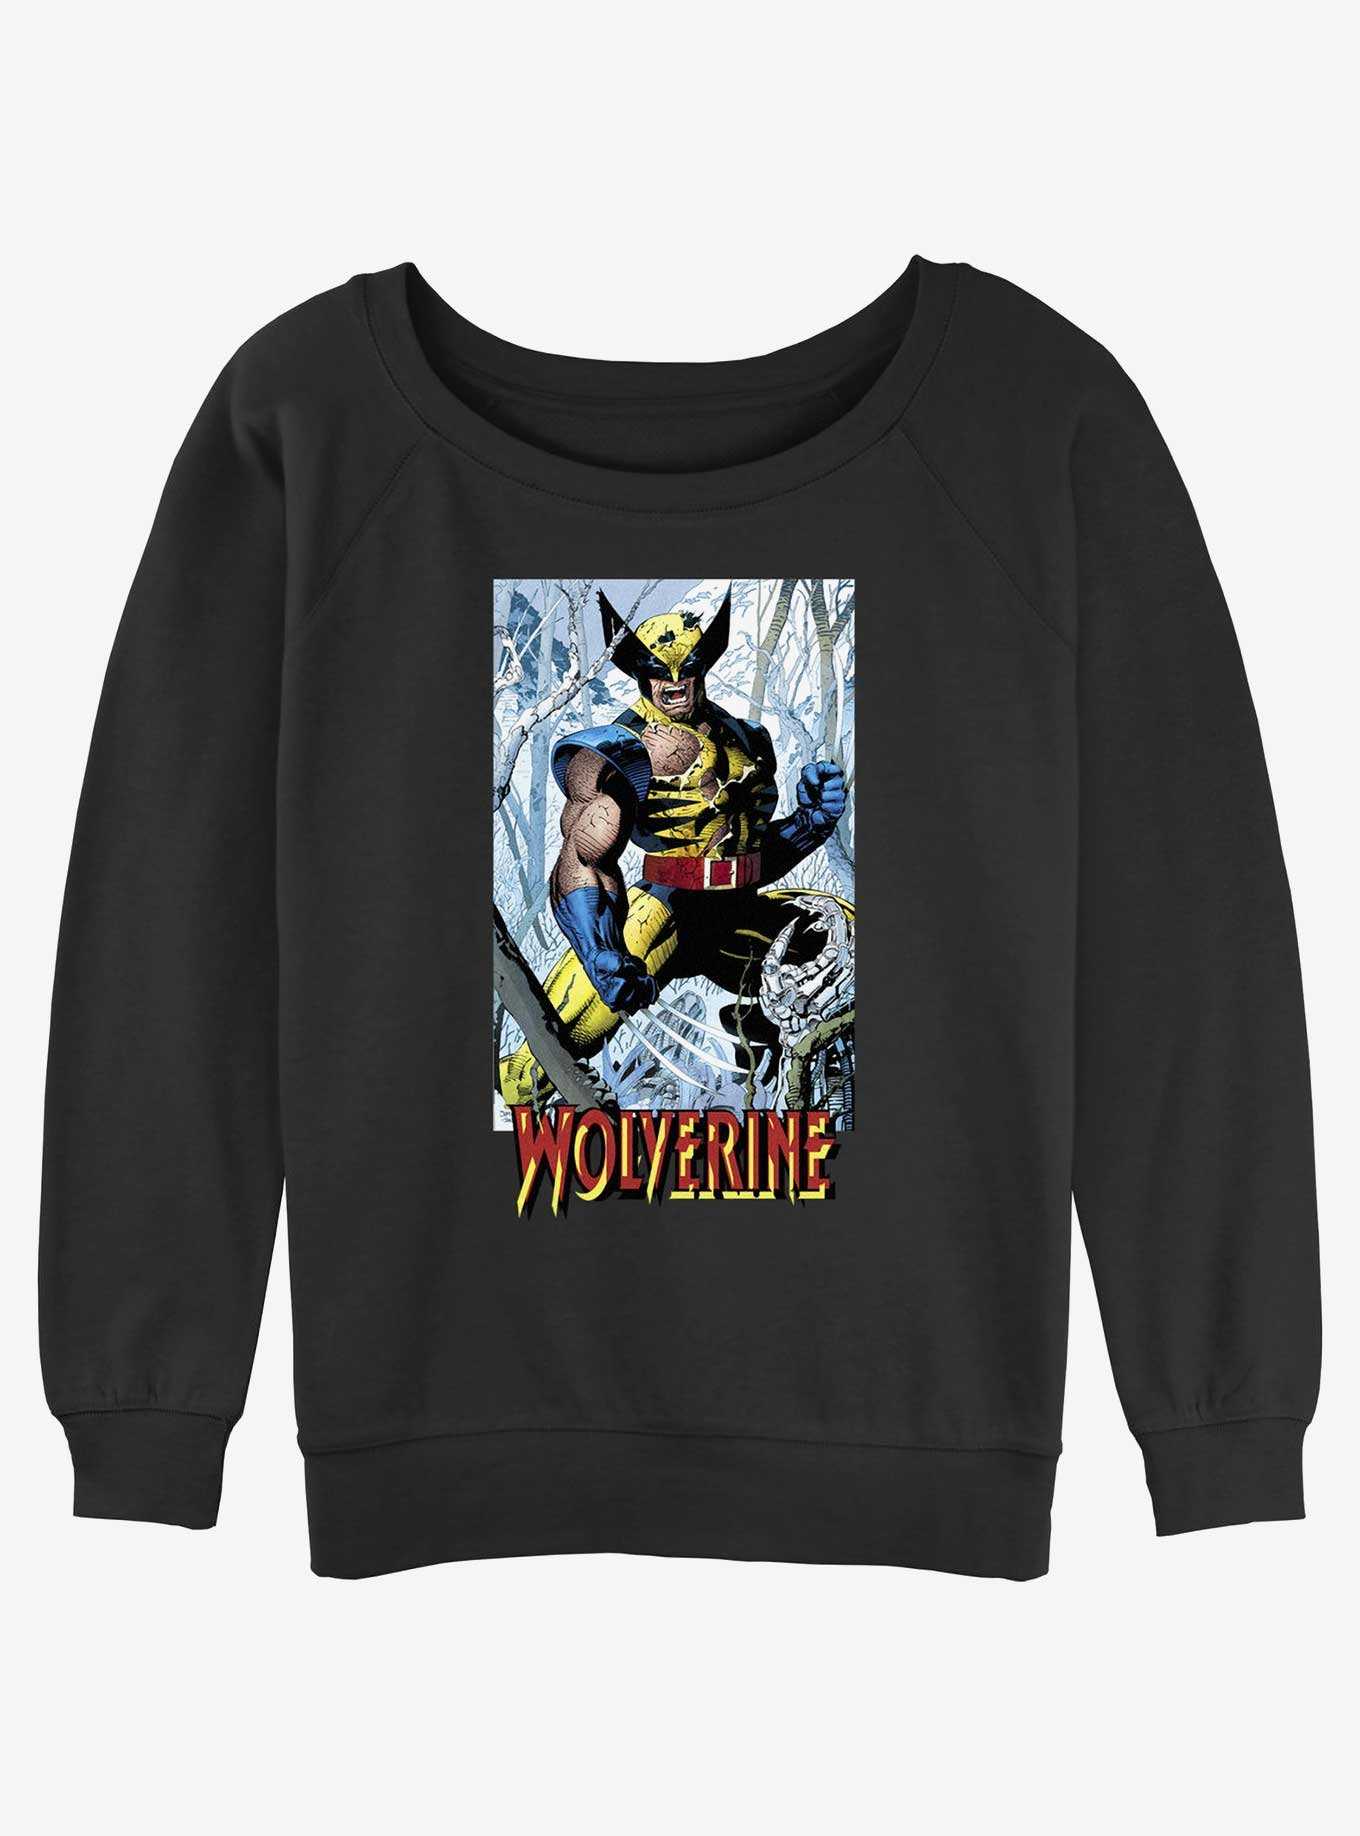 Wolverine Discipline 22 From Then Til Now Trading Card Womens Slouchy Sweatshirt, , hi-res